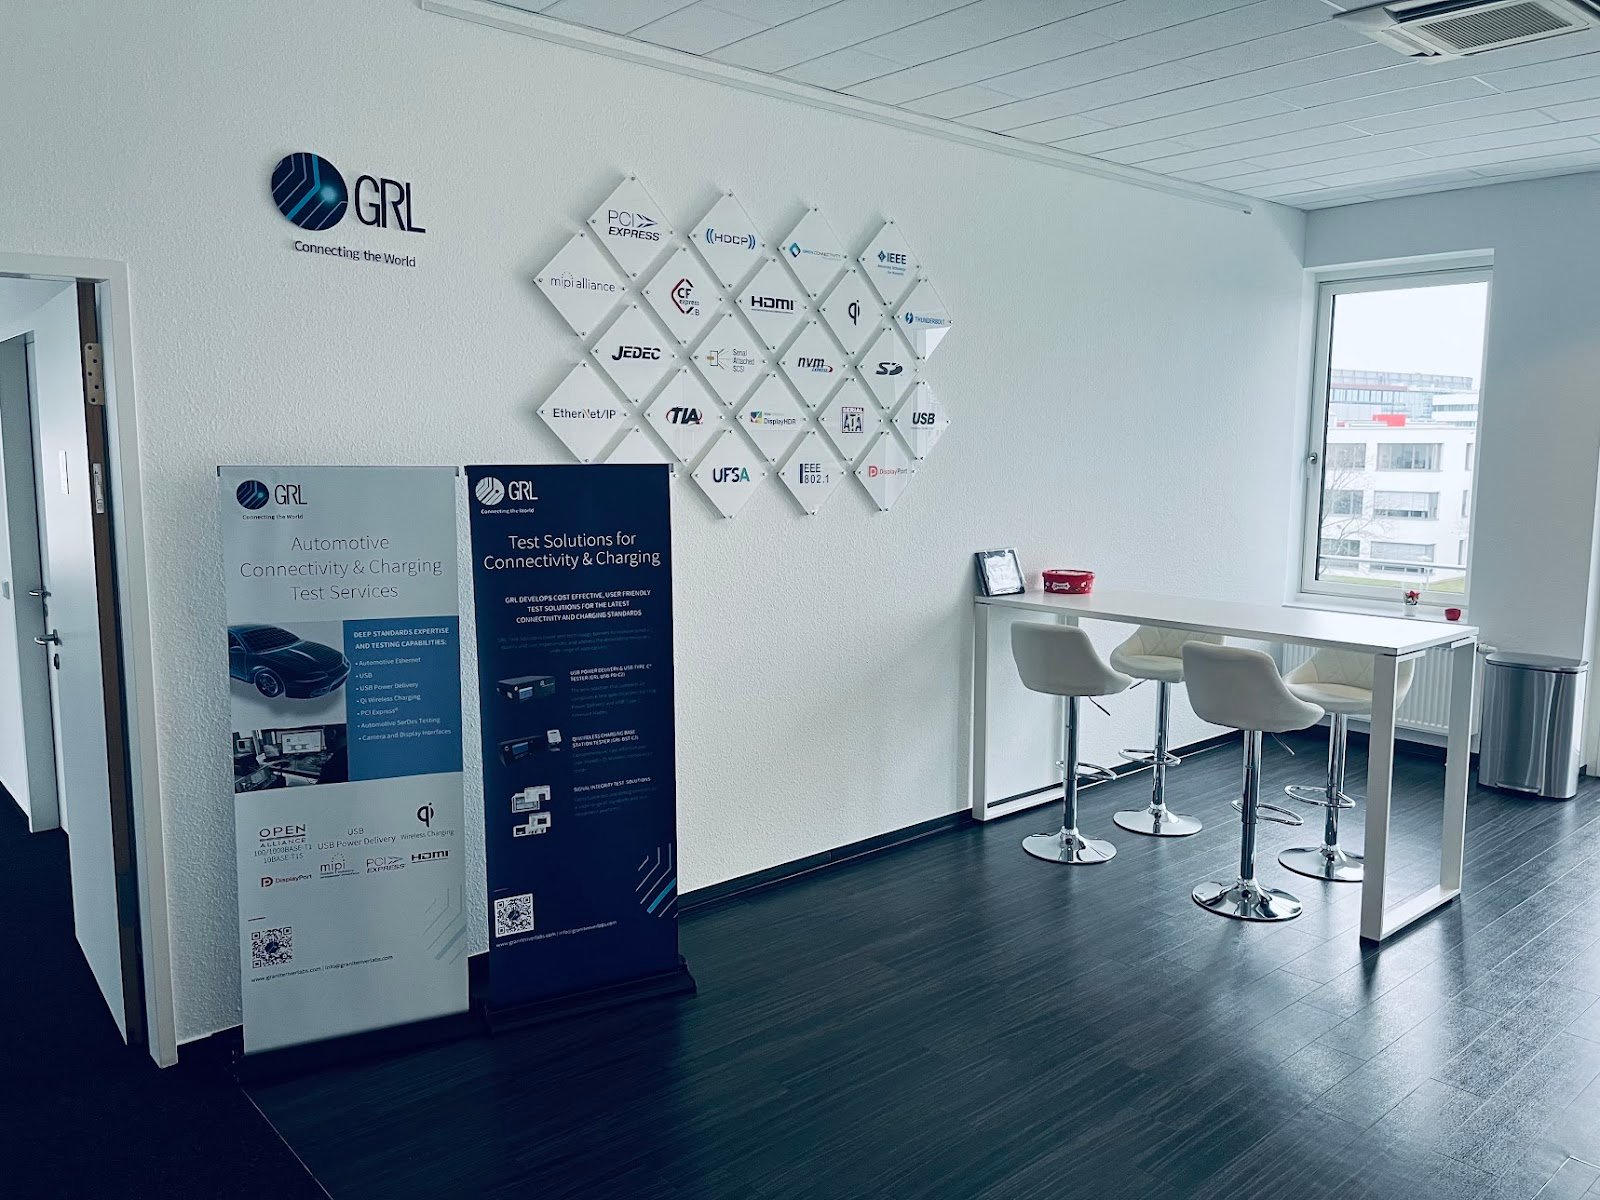 Granite river labs_GRL Germany Lab, Karlsruhe_centre of innovation_automotive networking_infotainment_charging and power management